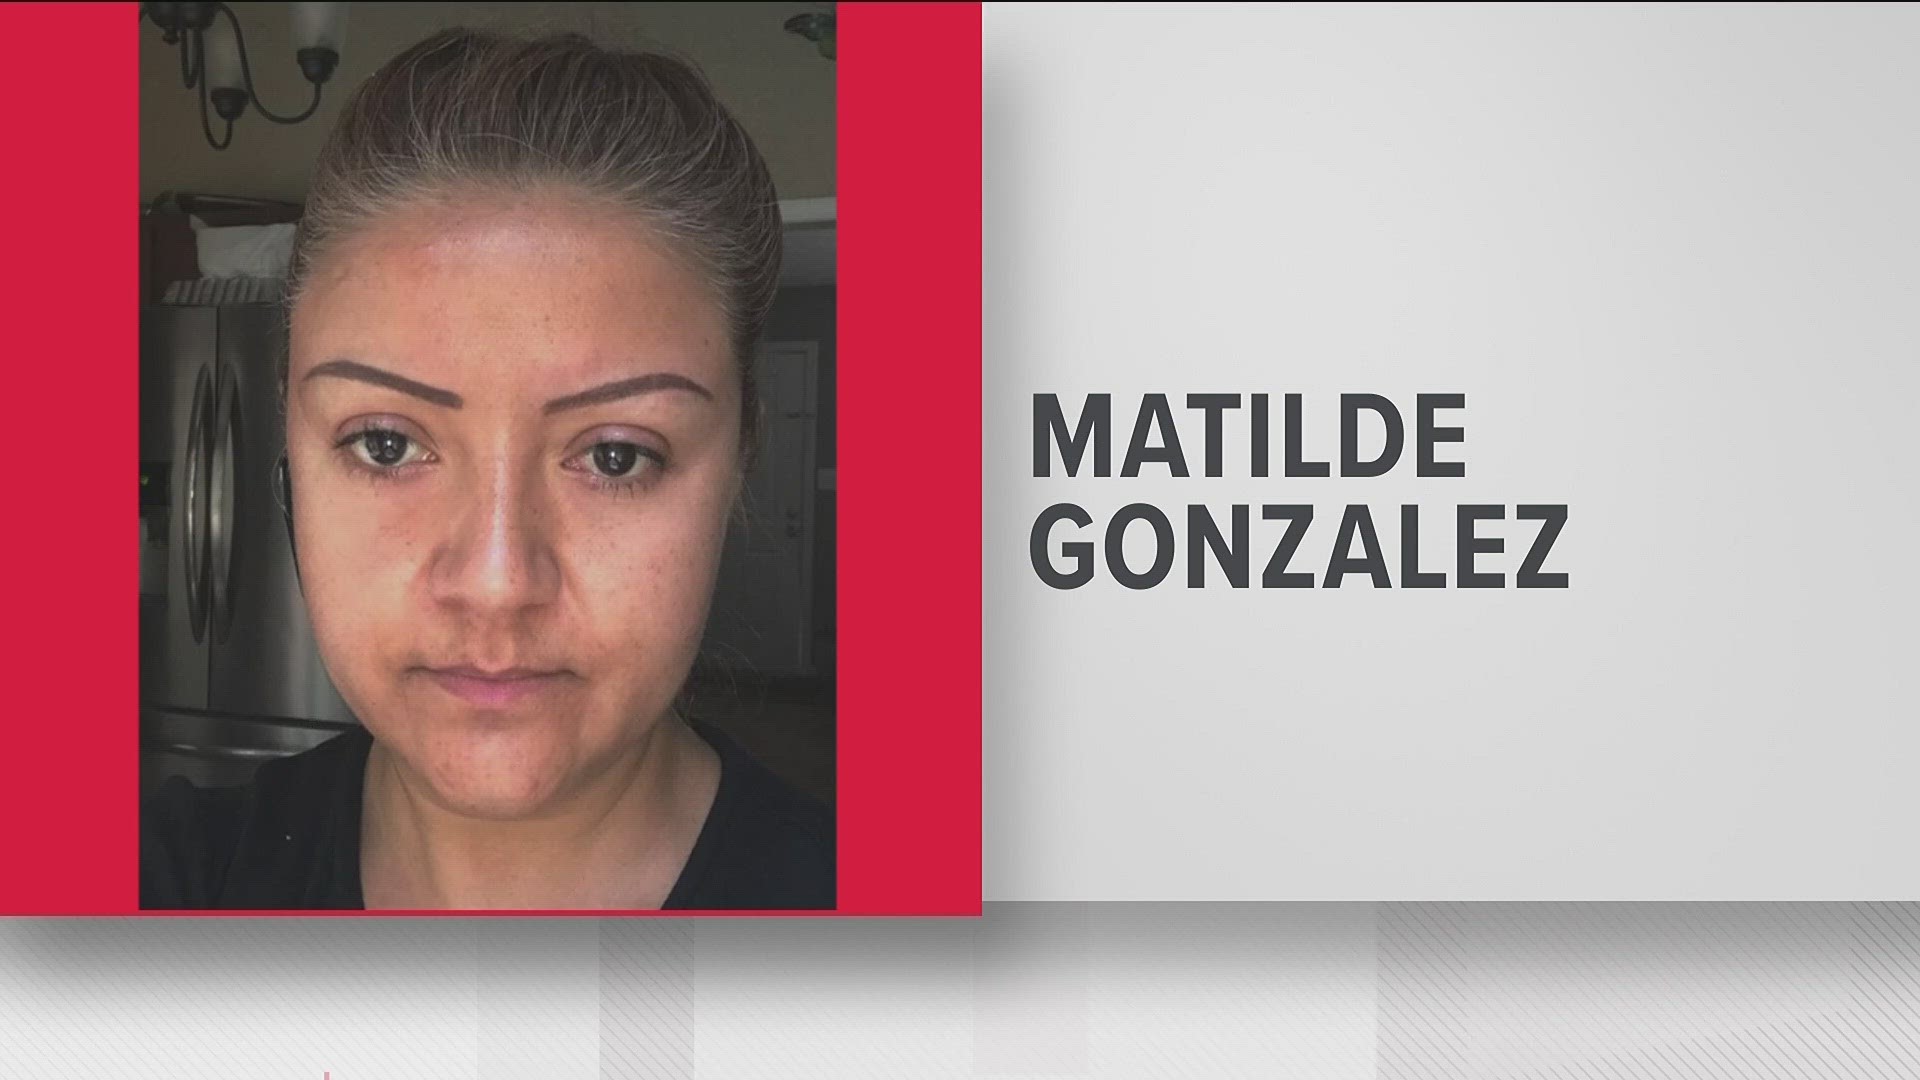 Matilde Gonzalez has been missing since October 11, 2019, marking three years and 11 months without answers, but on Friday, police said they hit a breakthrough.